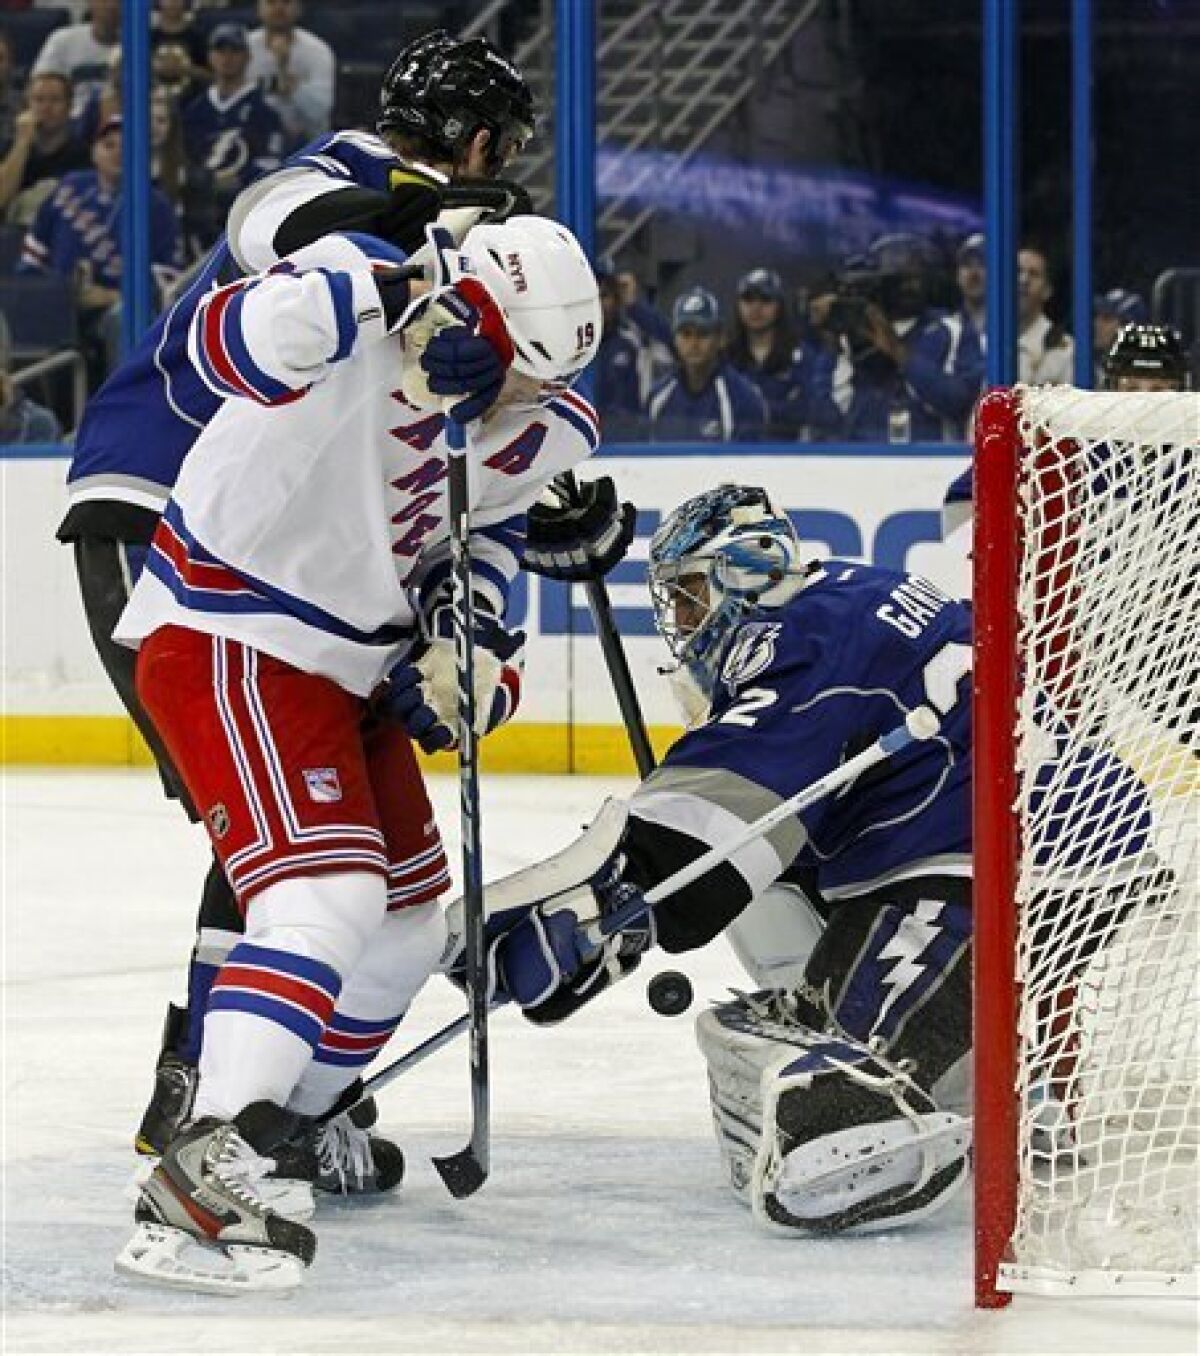 Tampa Bay Lightning goalie Mathieu Garon, right, makes a save in front of New York Rangers' Brad Richards during the first period of an NHL hockey game on Saturday, Dec. 3, 2011, in Tampa, Fla. (AP Photo/Mike Carlson)